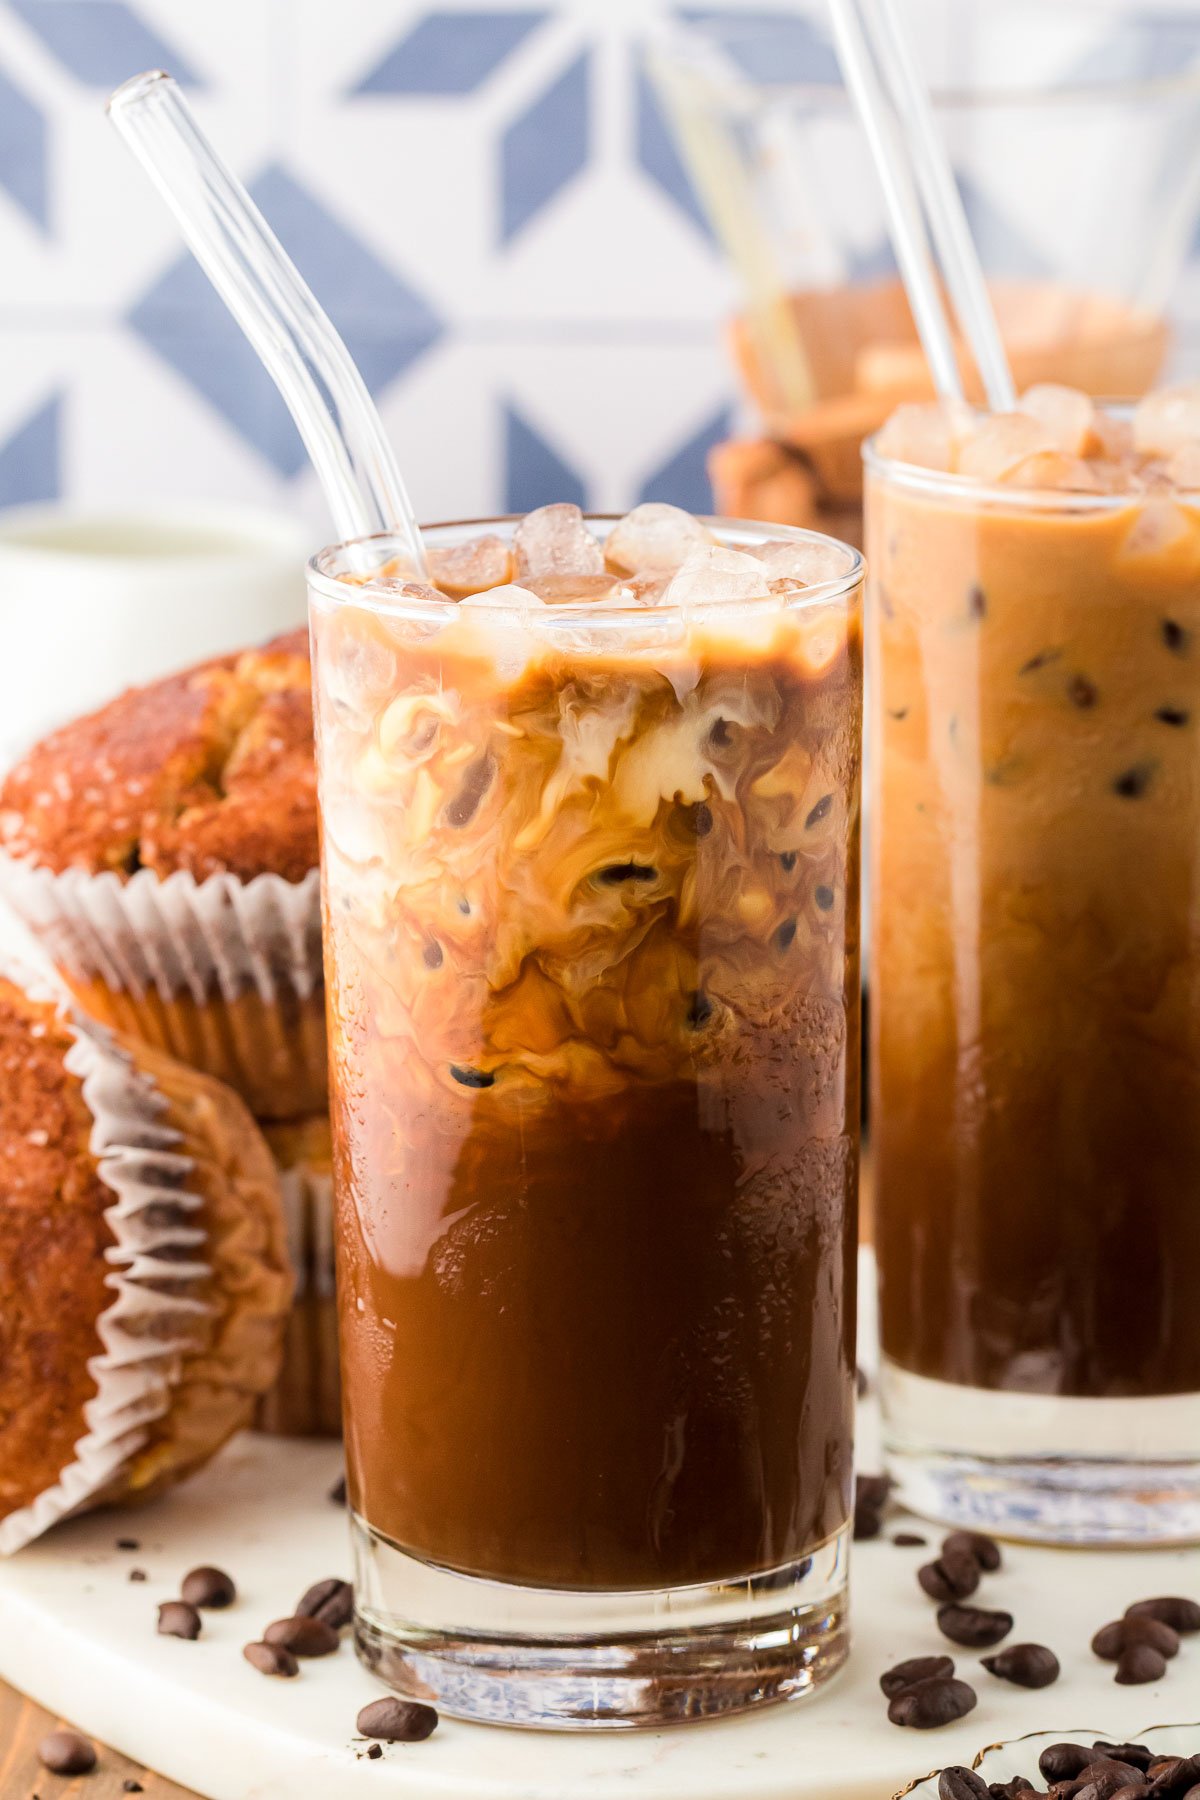 A glass of Thai Iced Coffee on a white serving board with more coffee and muffins in the background.